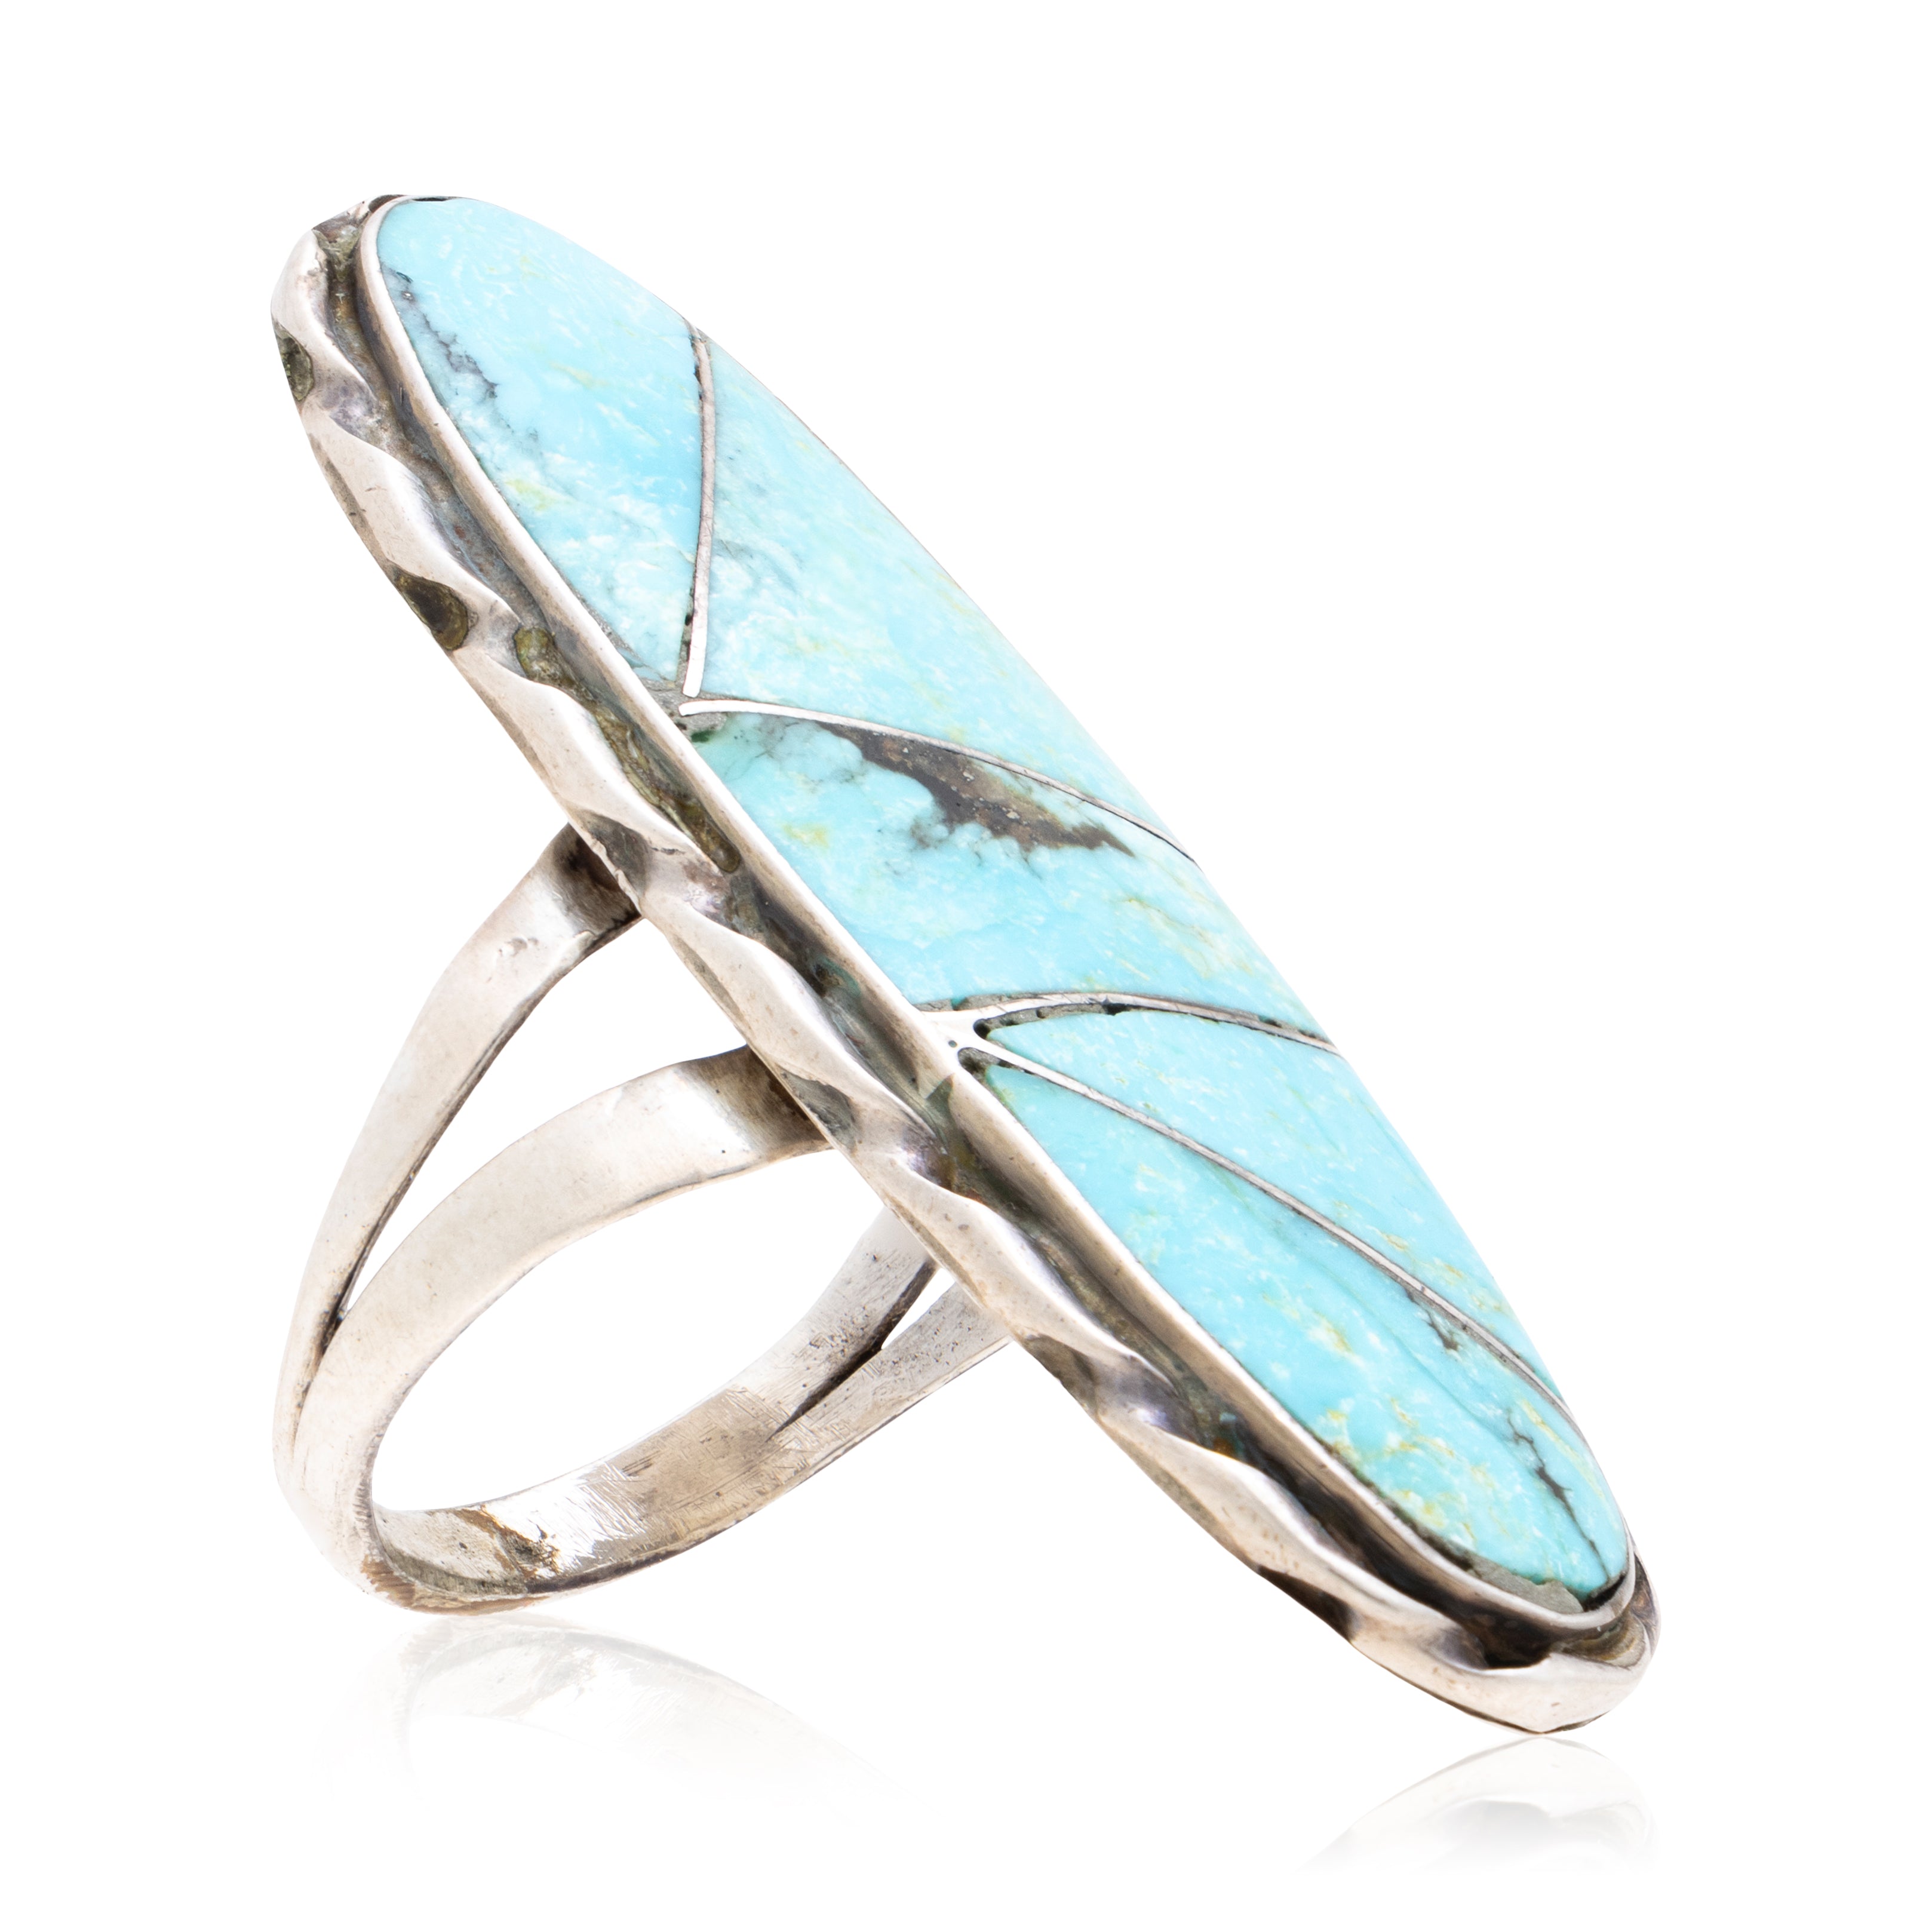 Navajo Inlay Turquoise Ring, Jewelry, Ring, Native